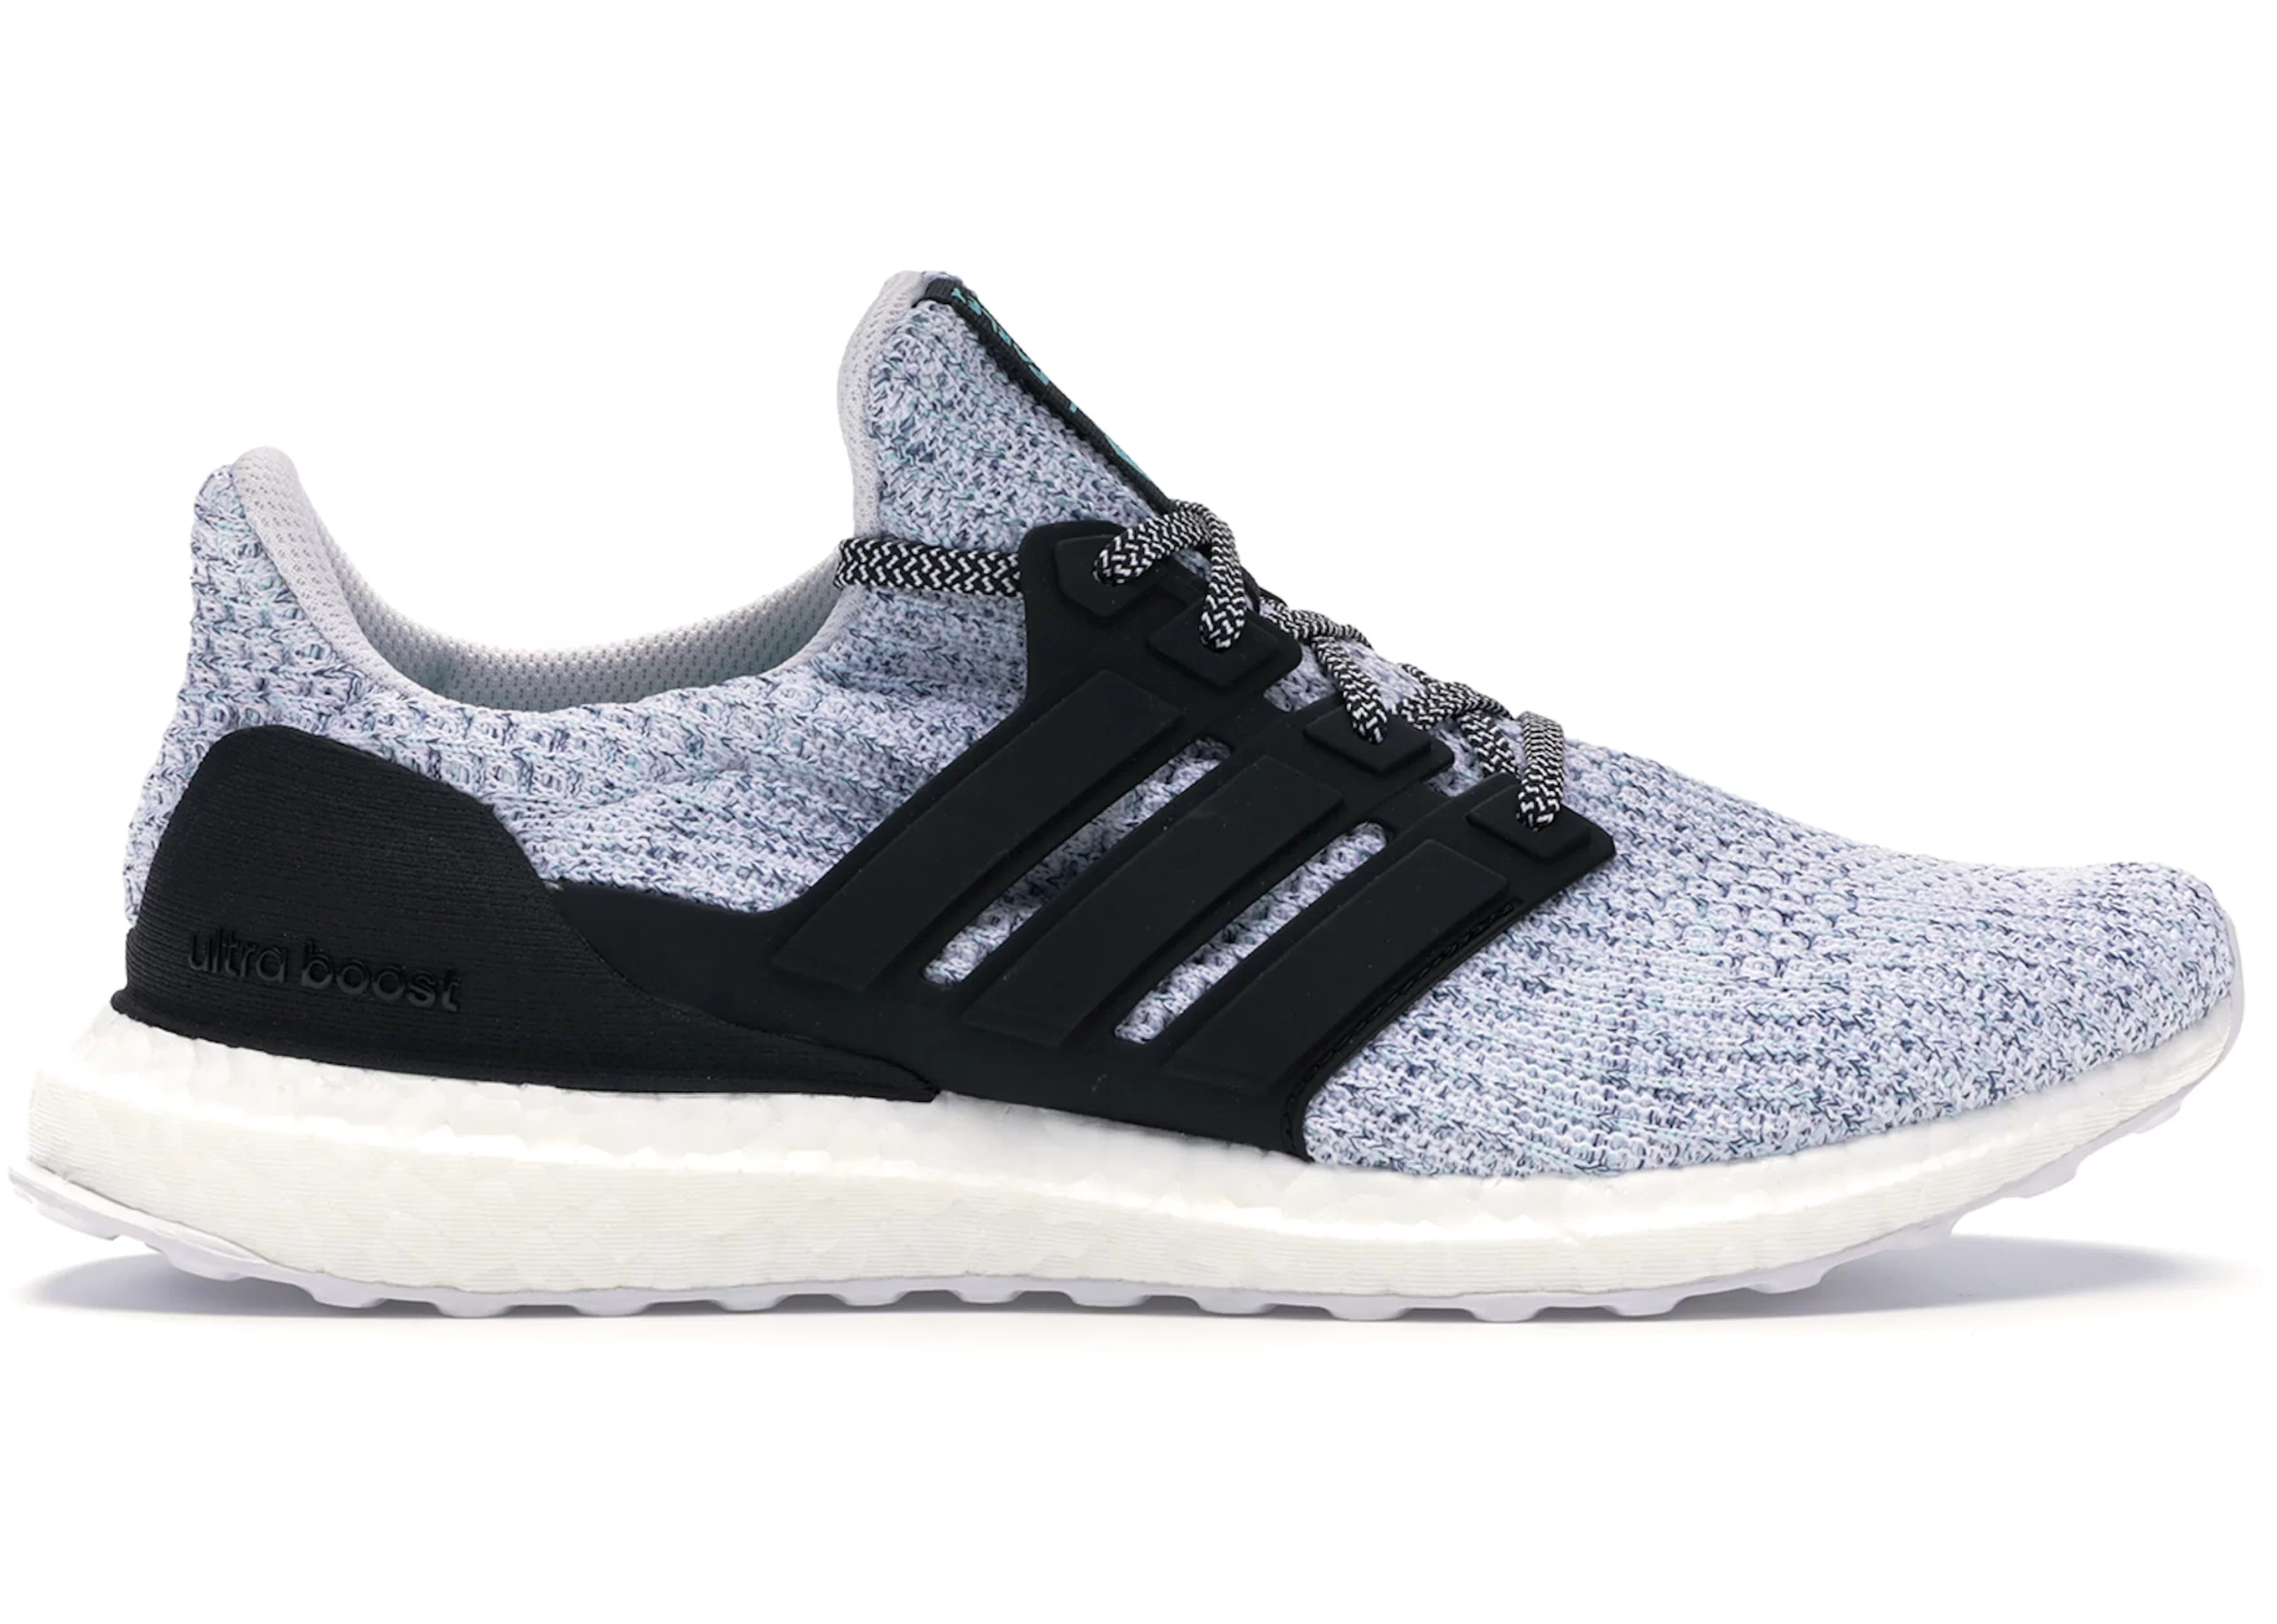 Adidas Ultra Boost 4.0 Parley White Blue (women’s)